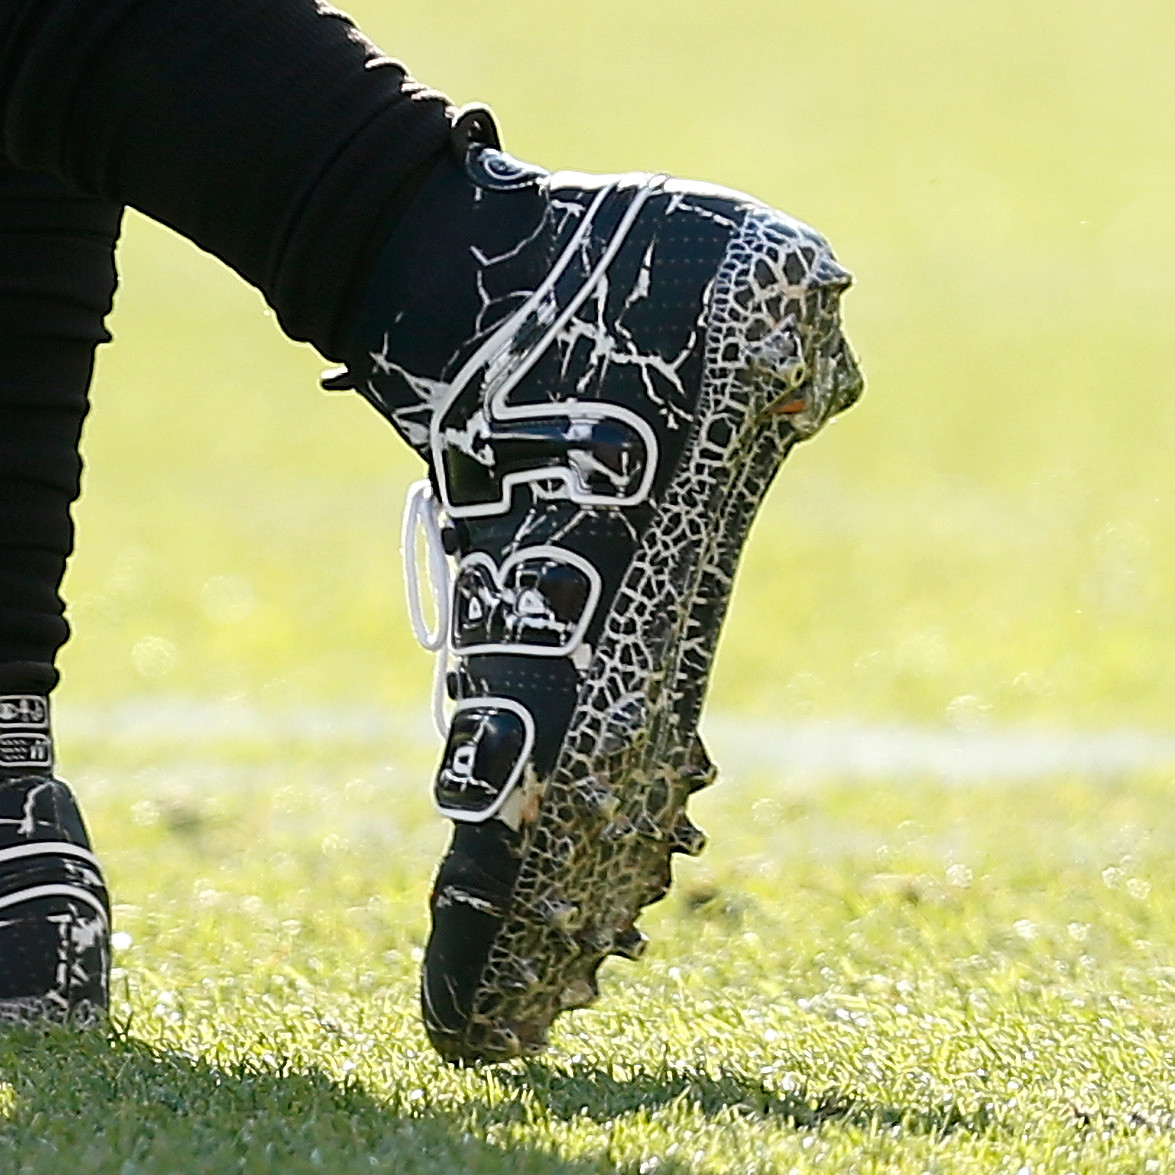 Every Cleat Worn by Odell Beckham Jr. This Season